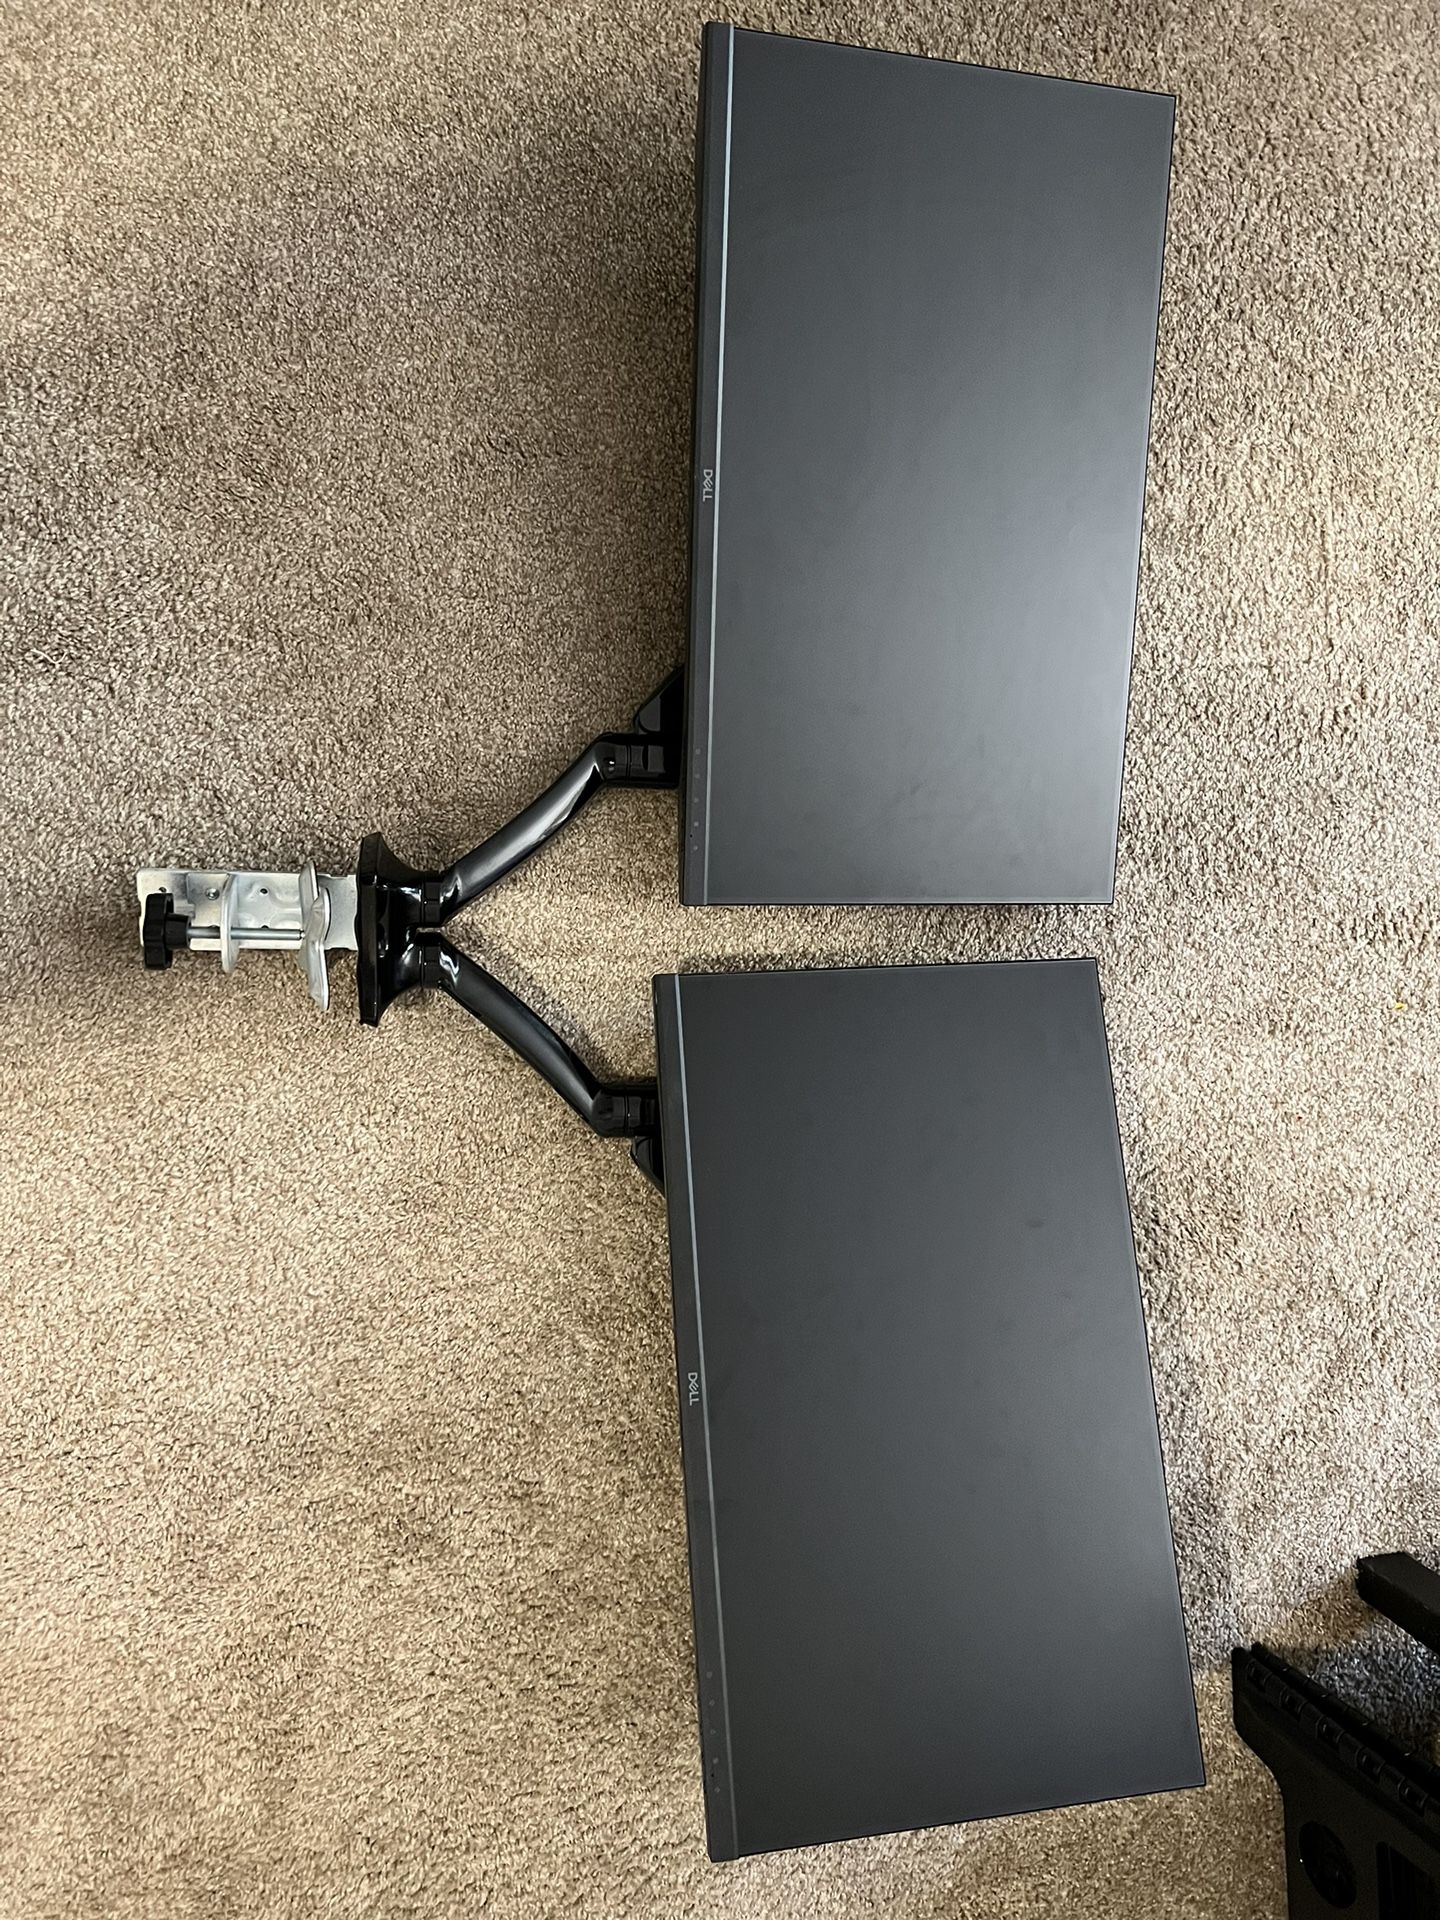 2 - 27 Inch dell Monitors with dual Arm Monitor Mount Stand